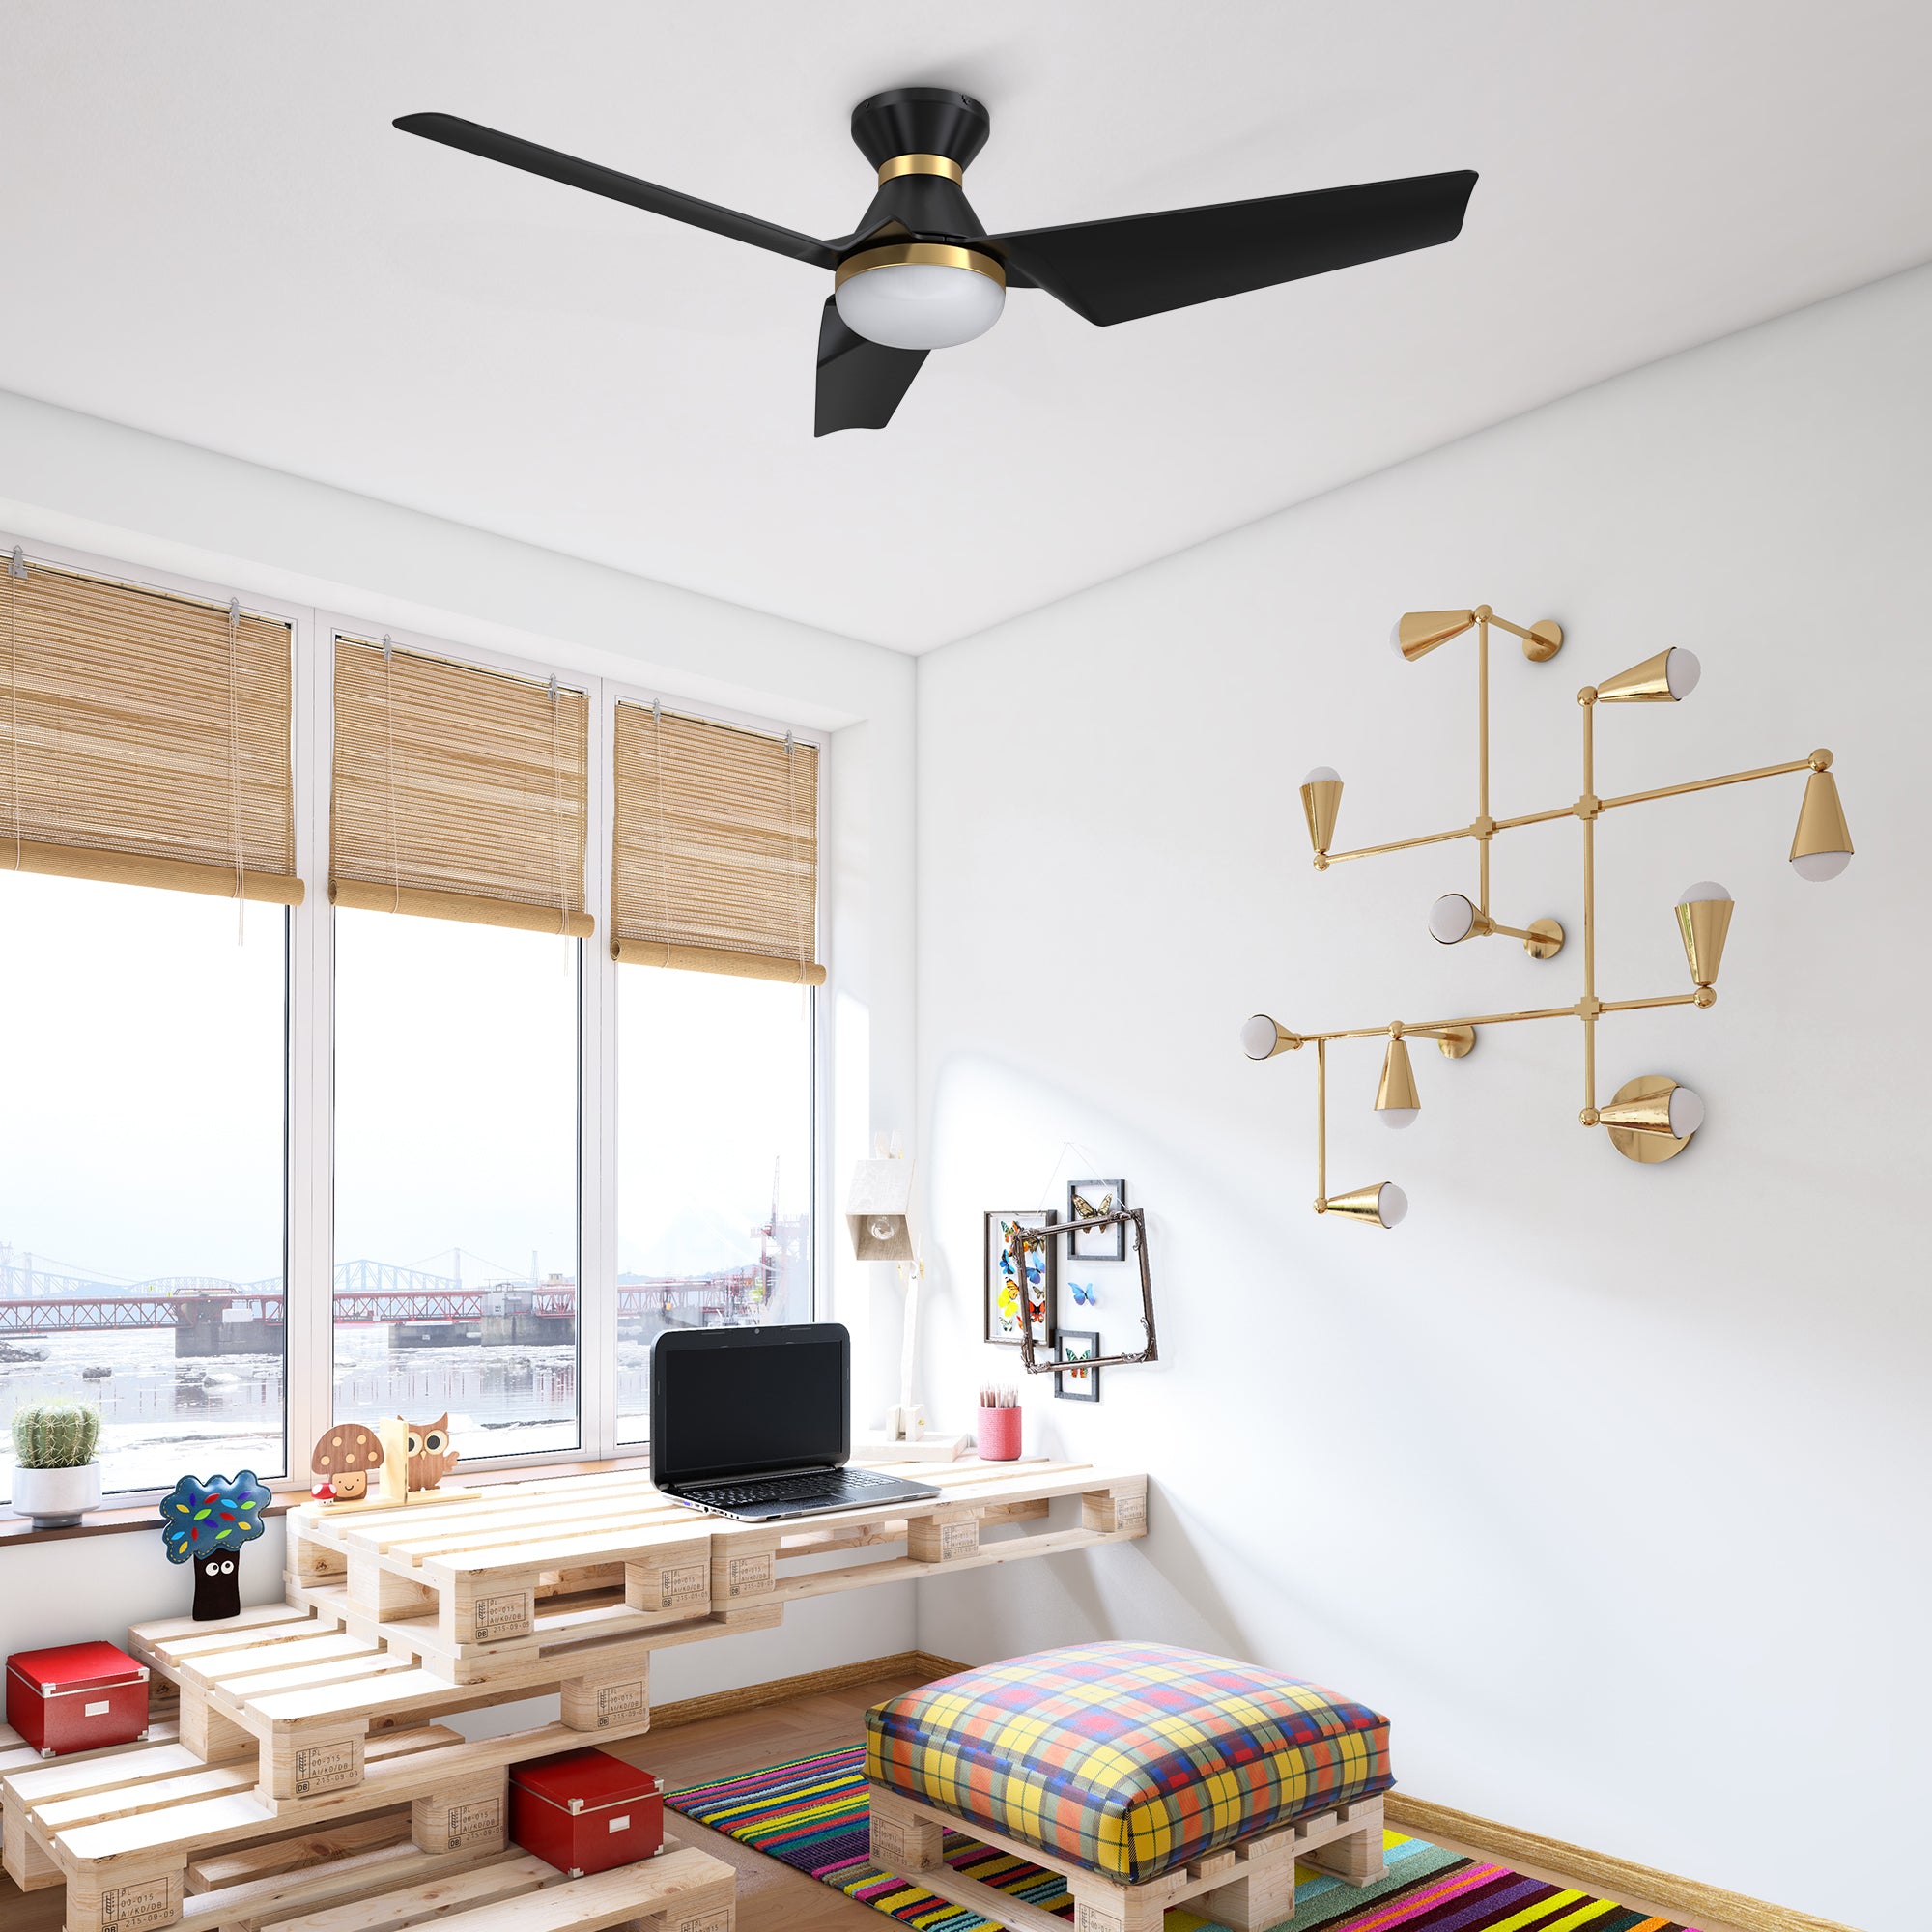 This Smafan Jett 52&#39;&#39; smart ceiling fan keeps your space cool, bright, and stylish. It is a soft modern masterpiece perfect for your large indoor living spaces. This Wifi smart ceiling fan is a simplicity designing with Black finish, use very strong ABS blades and has an integrated 4000K LED daylight.